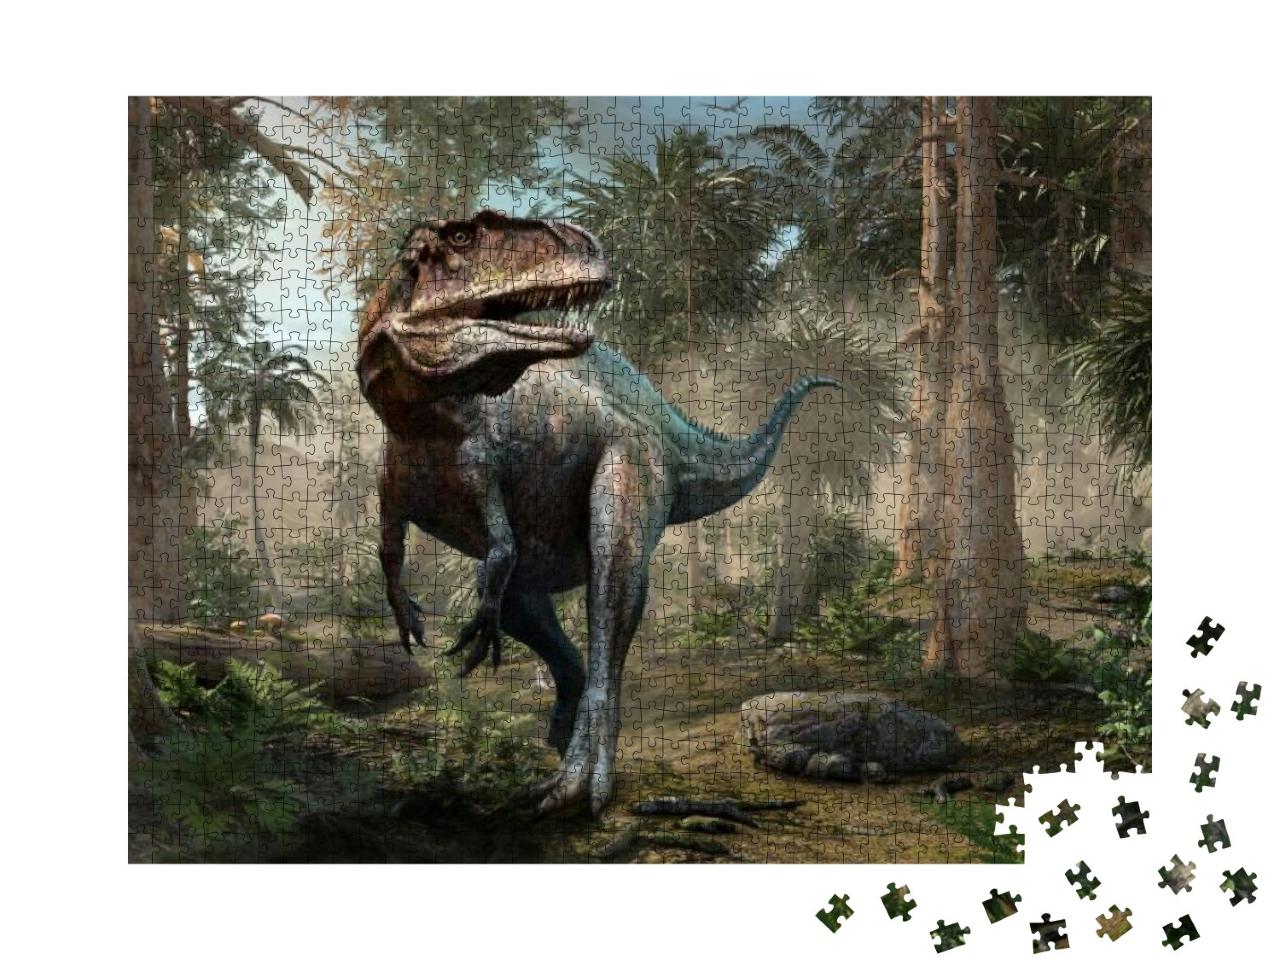 Acrocanthosaurus Forest Scene 3D Illustration... Jigsaw Puzzle with 1000 pieces